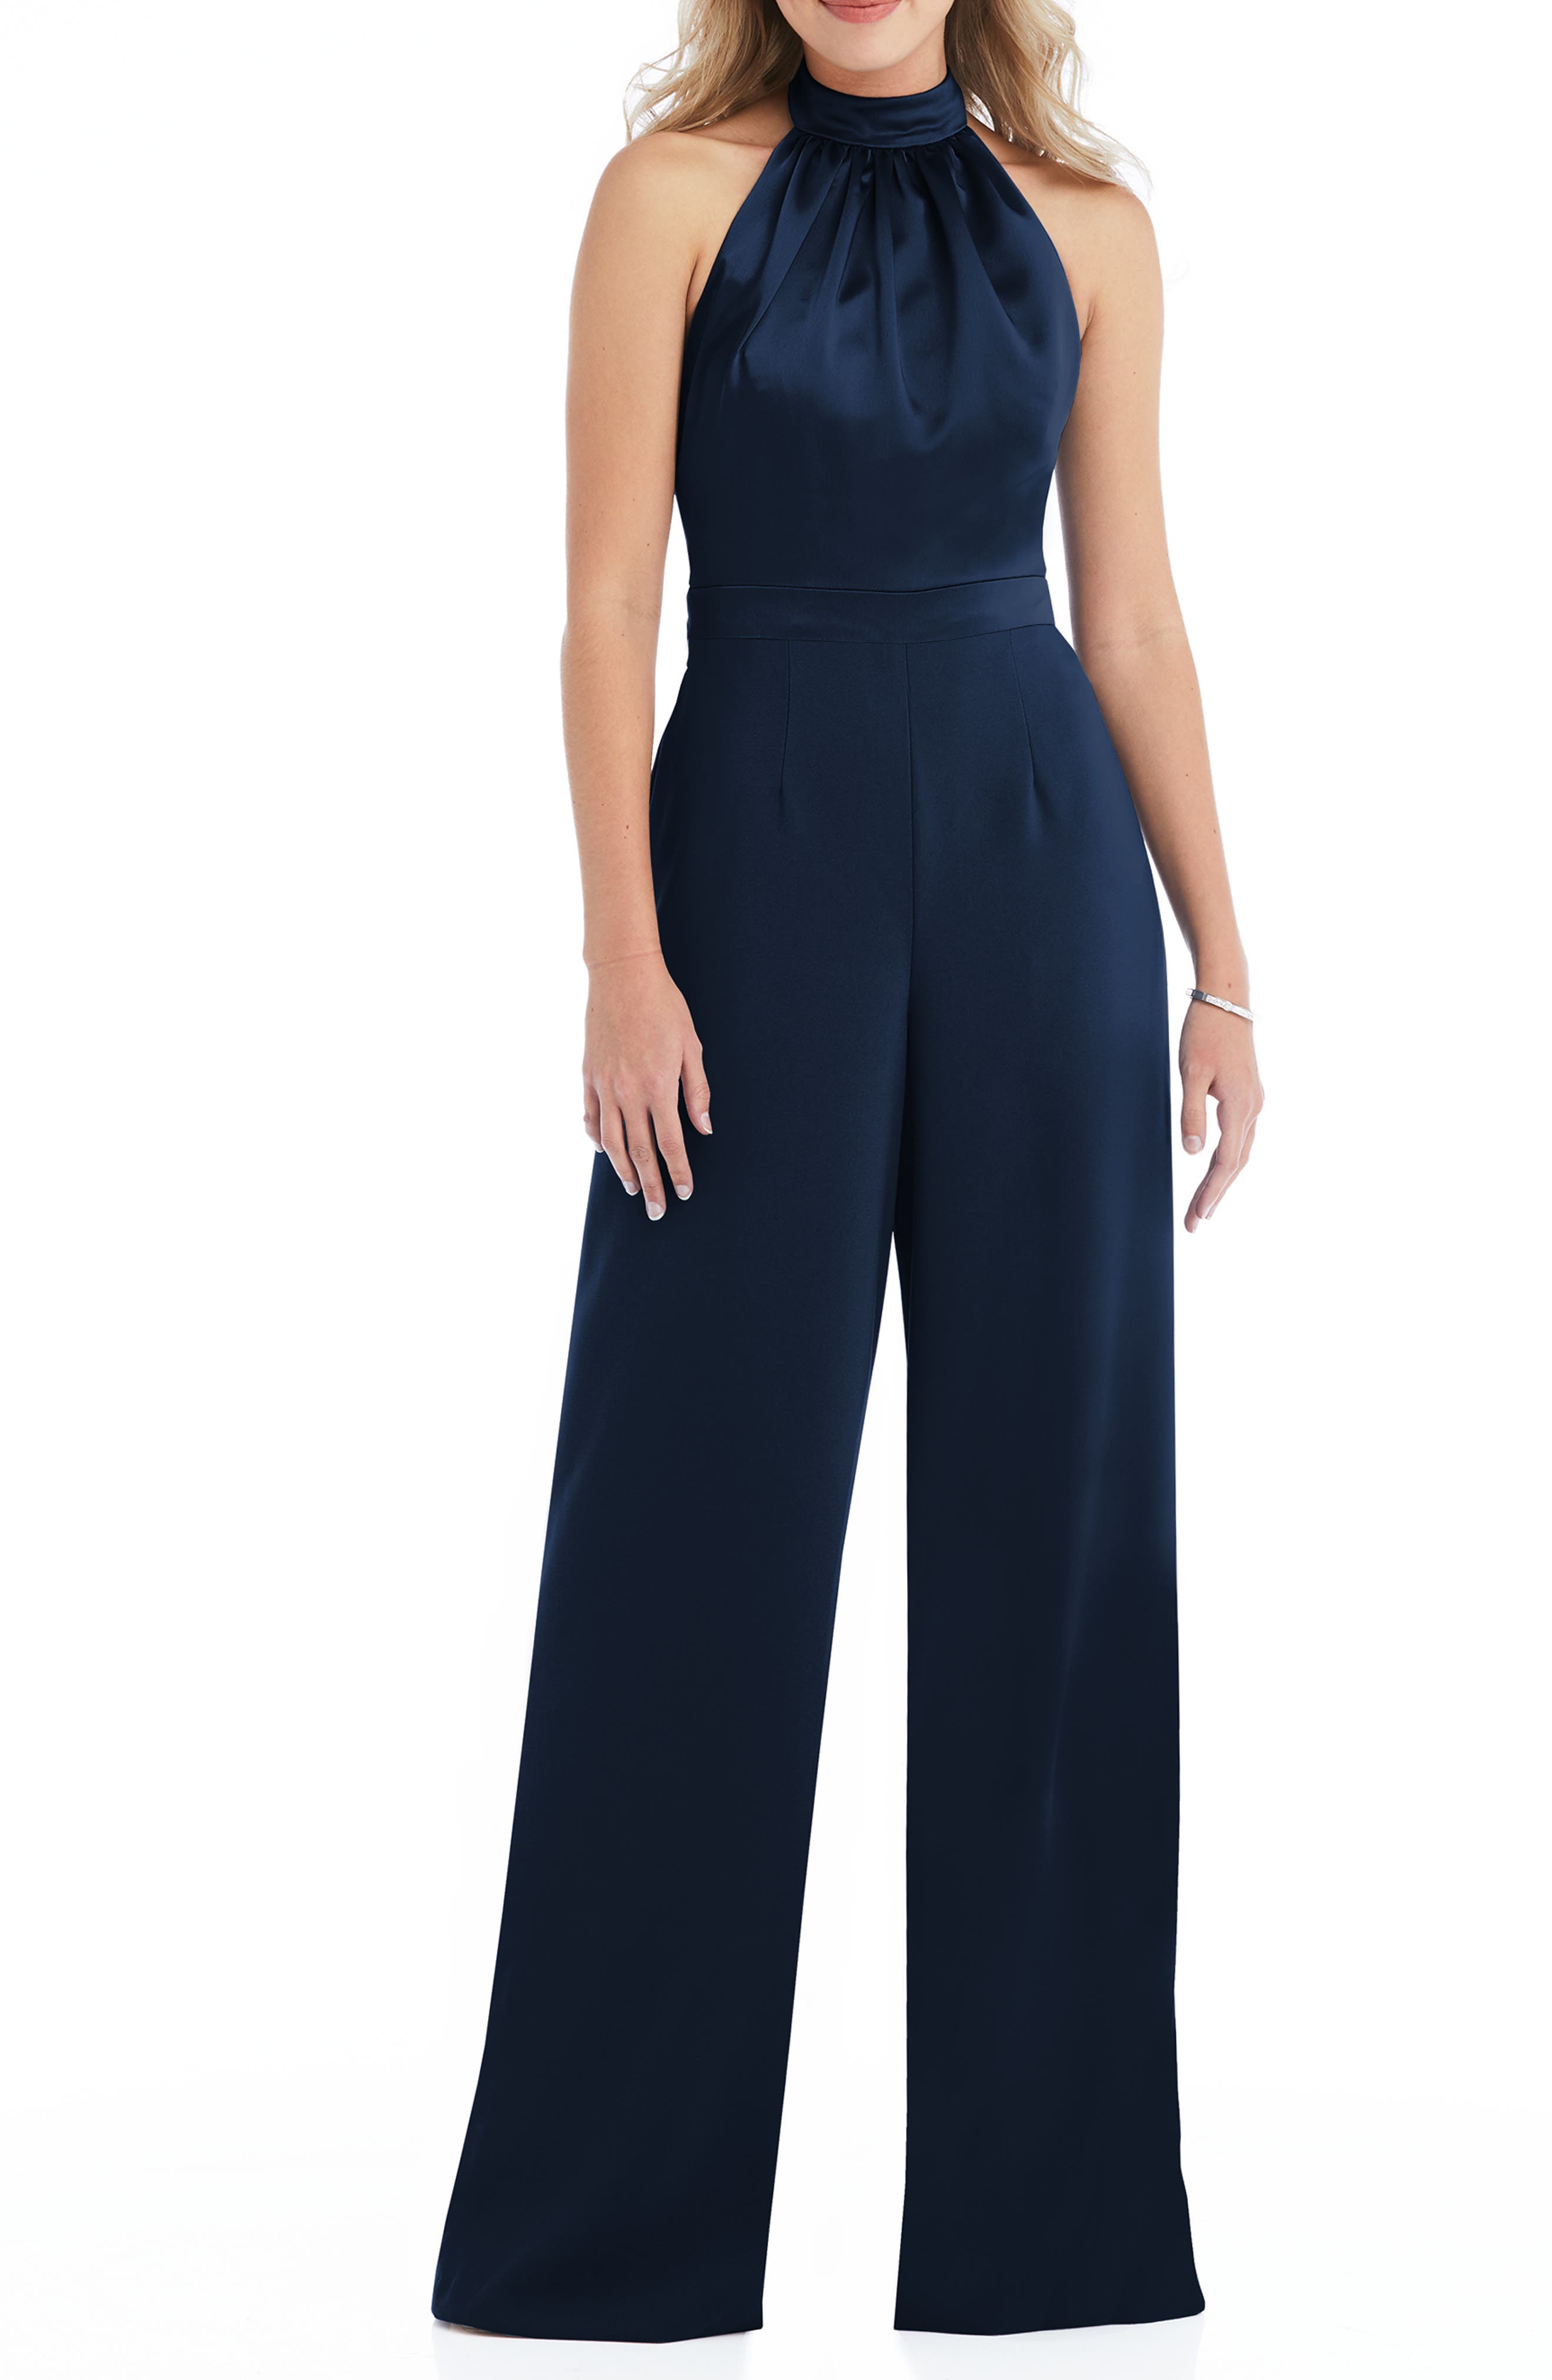 Party Jumpsuits ☀ Rompers for Women ...